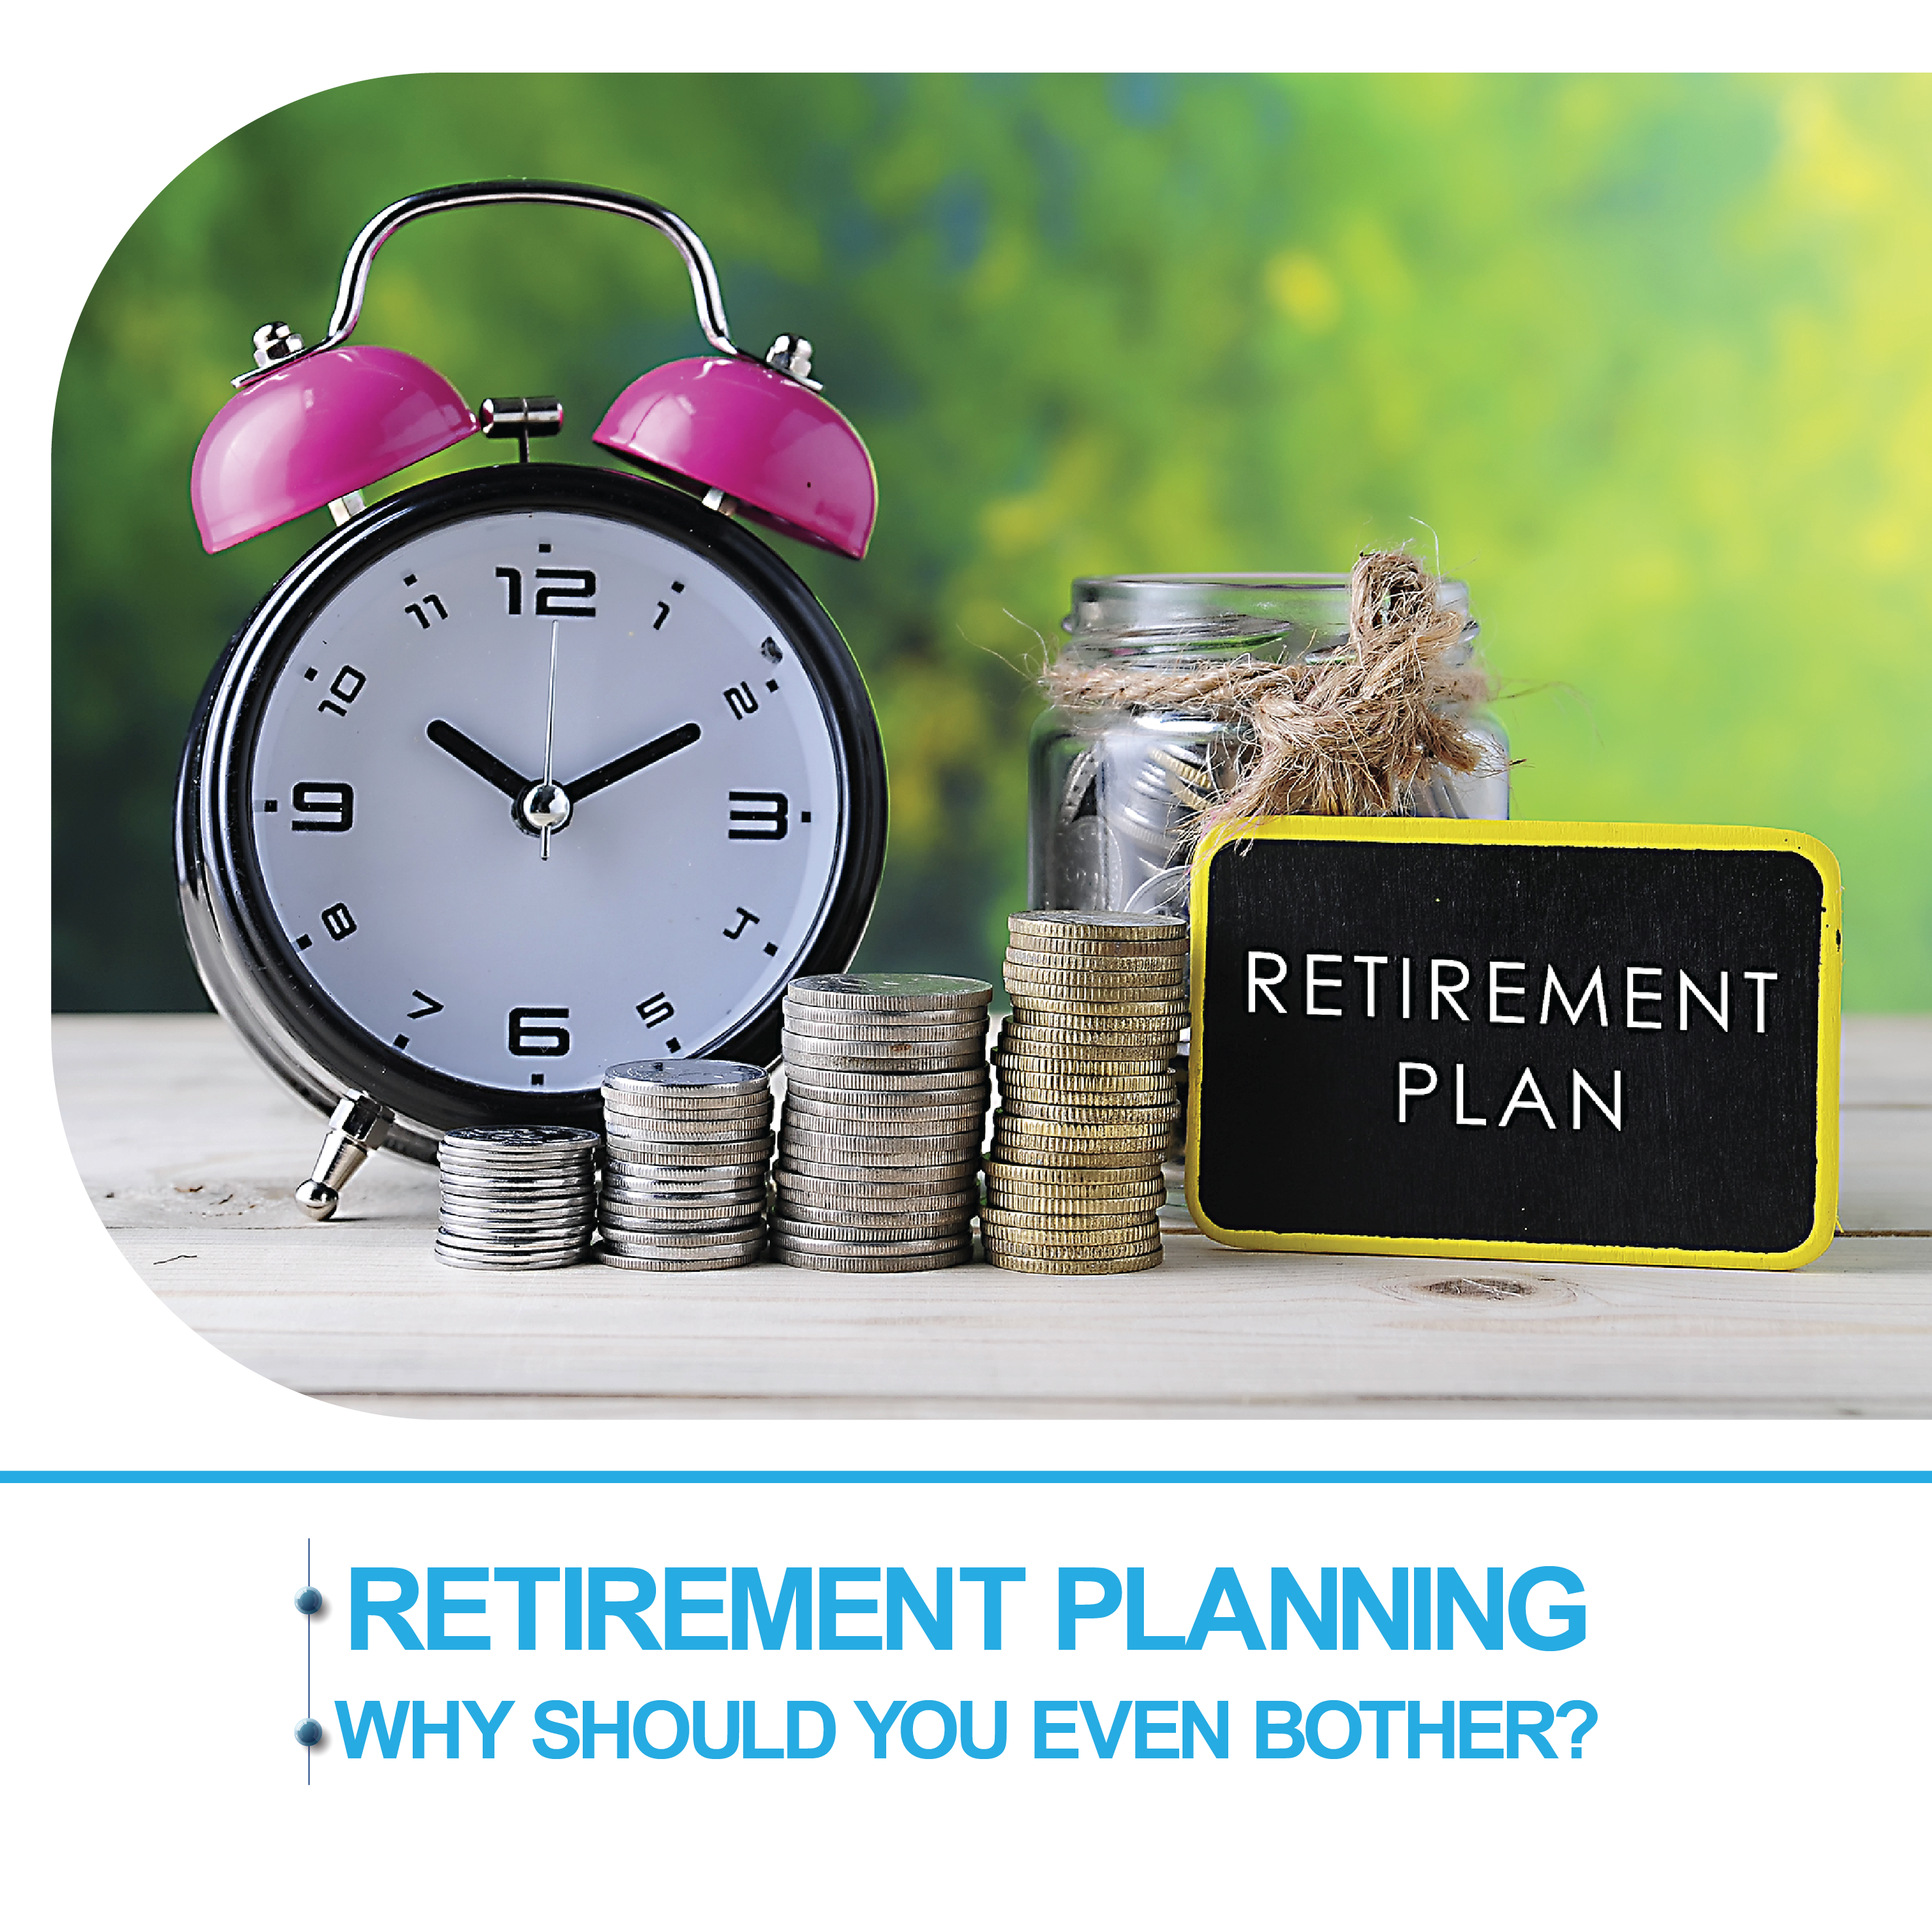 RETIREMENT PLANNING: WHY SHOULD YOU EVEN BOTHER?